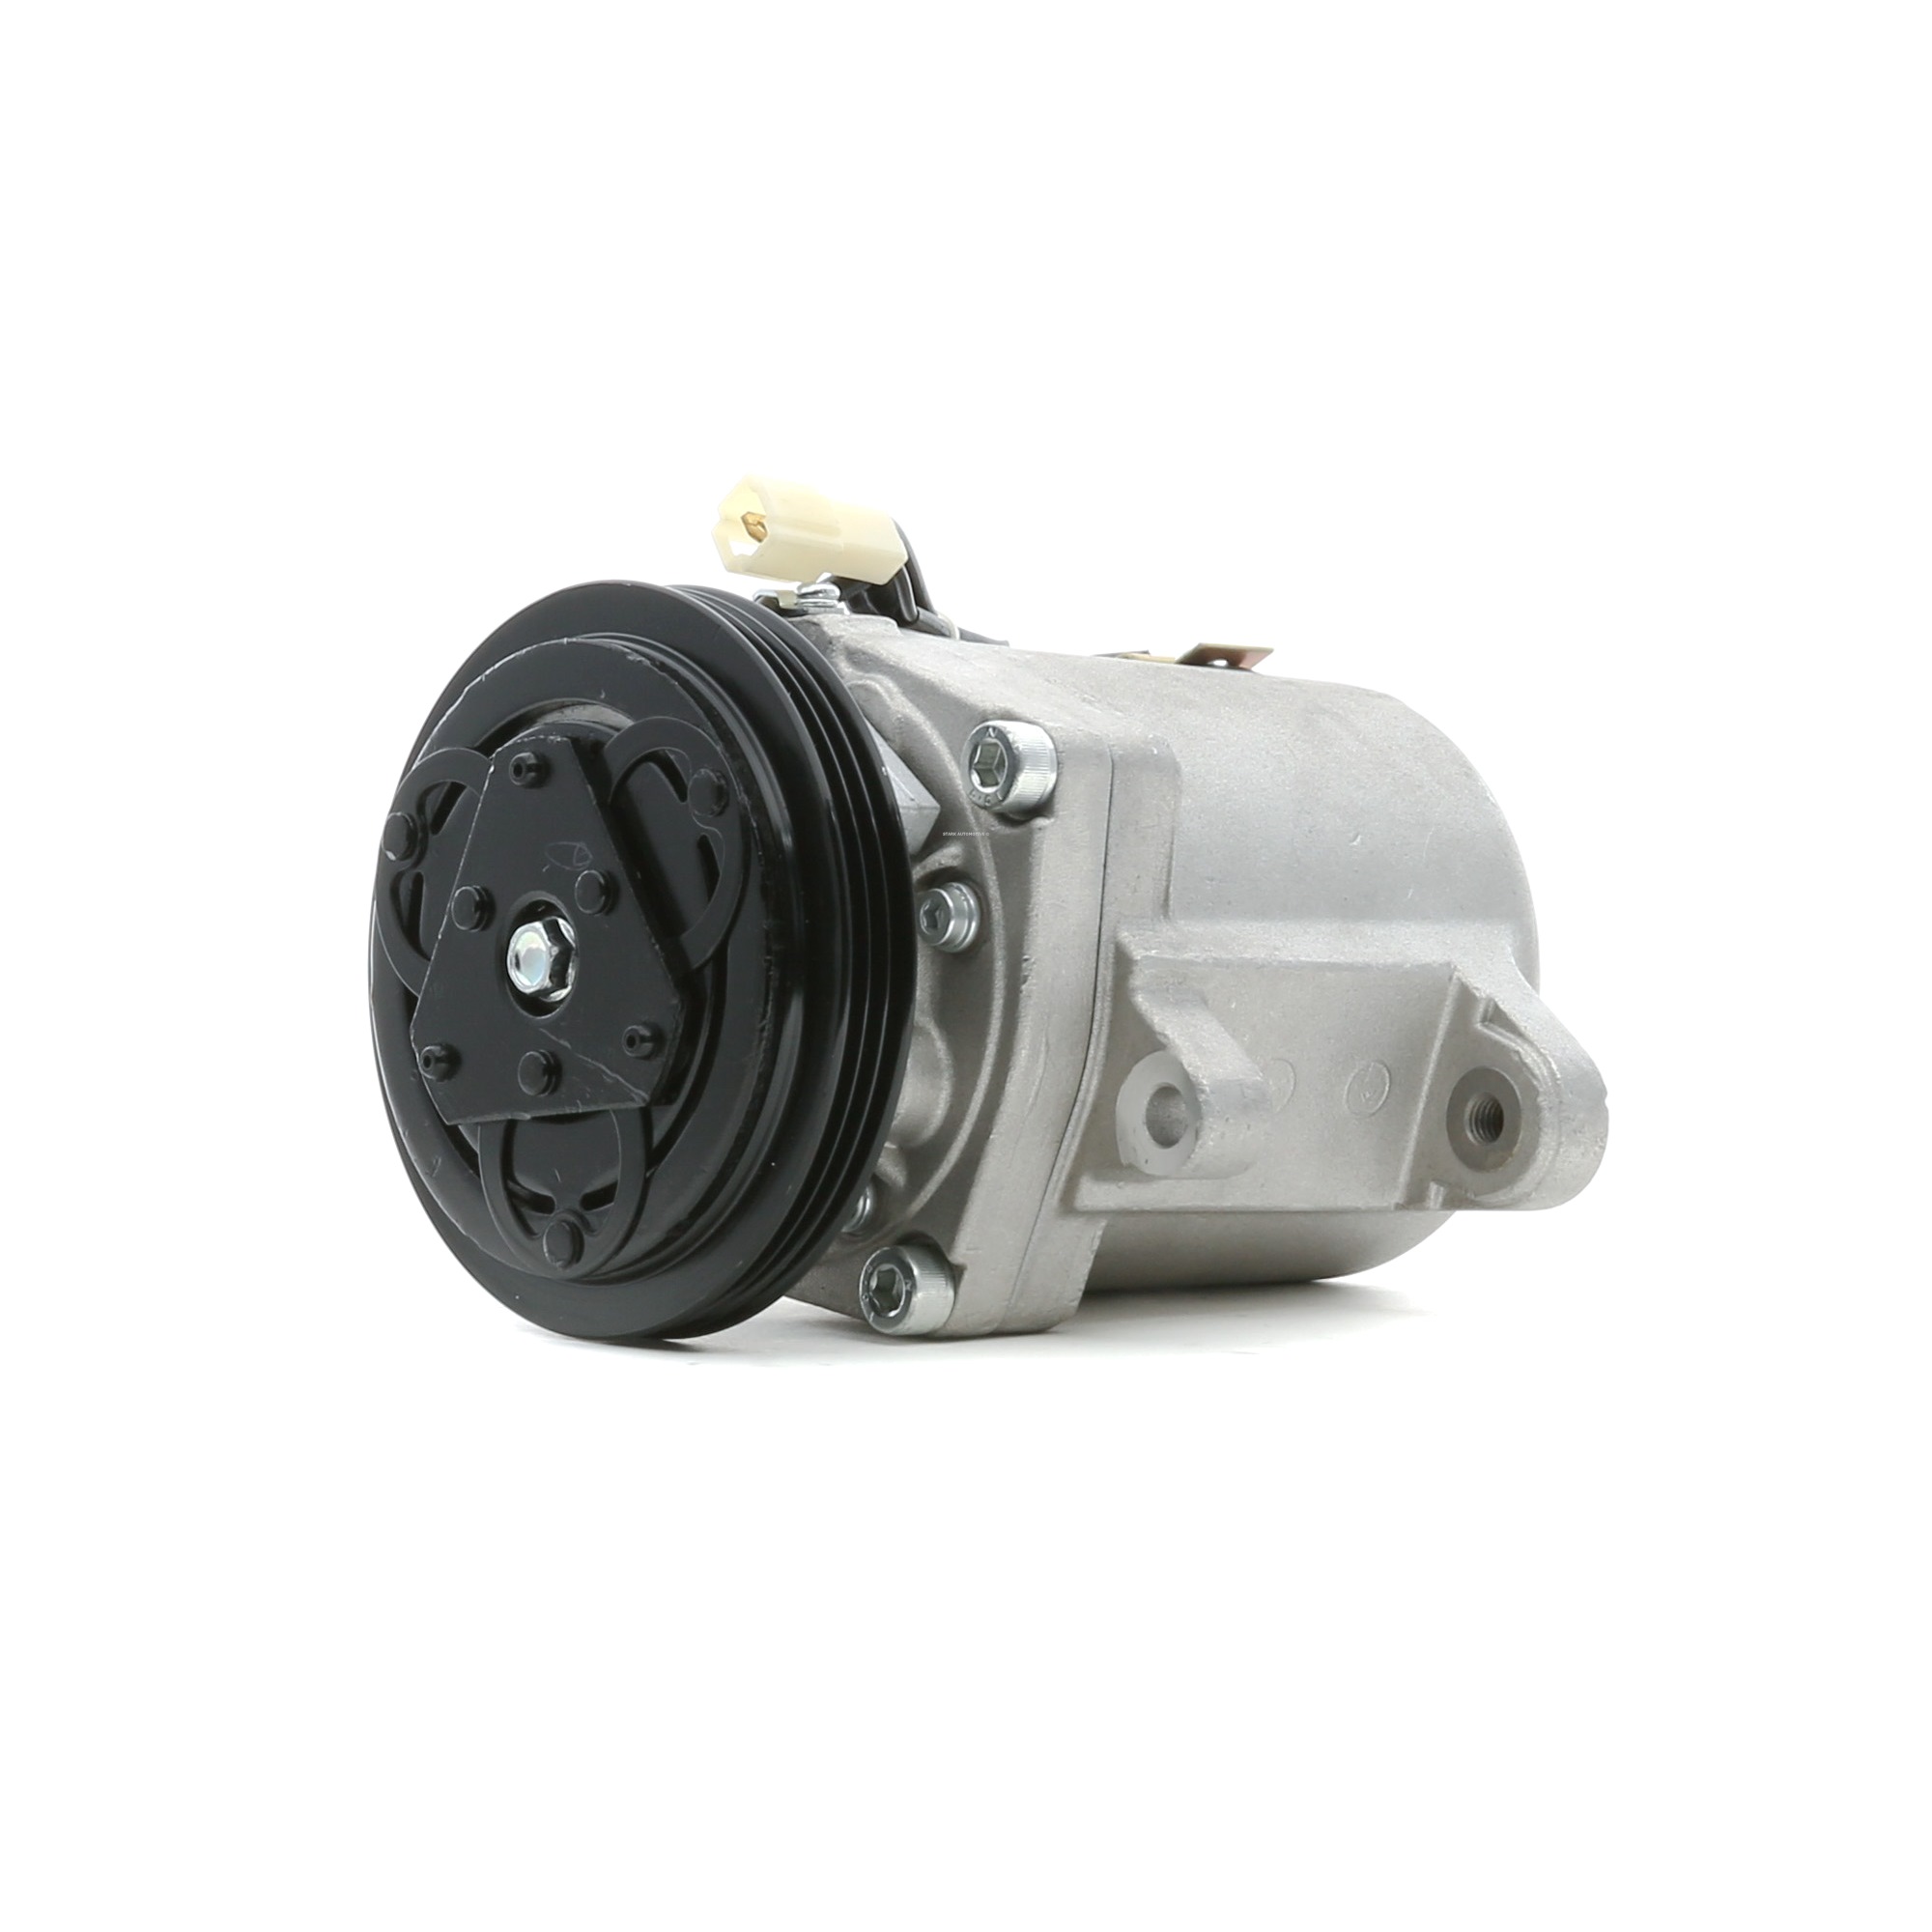 STARK SKKM-0340160 Air conditioning compressor SMART experience and price